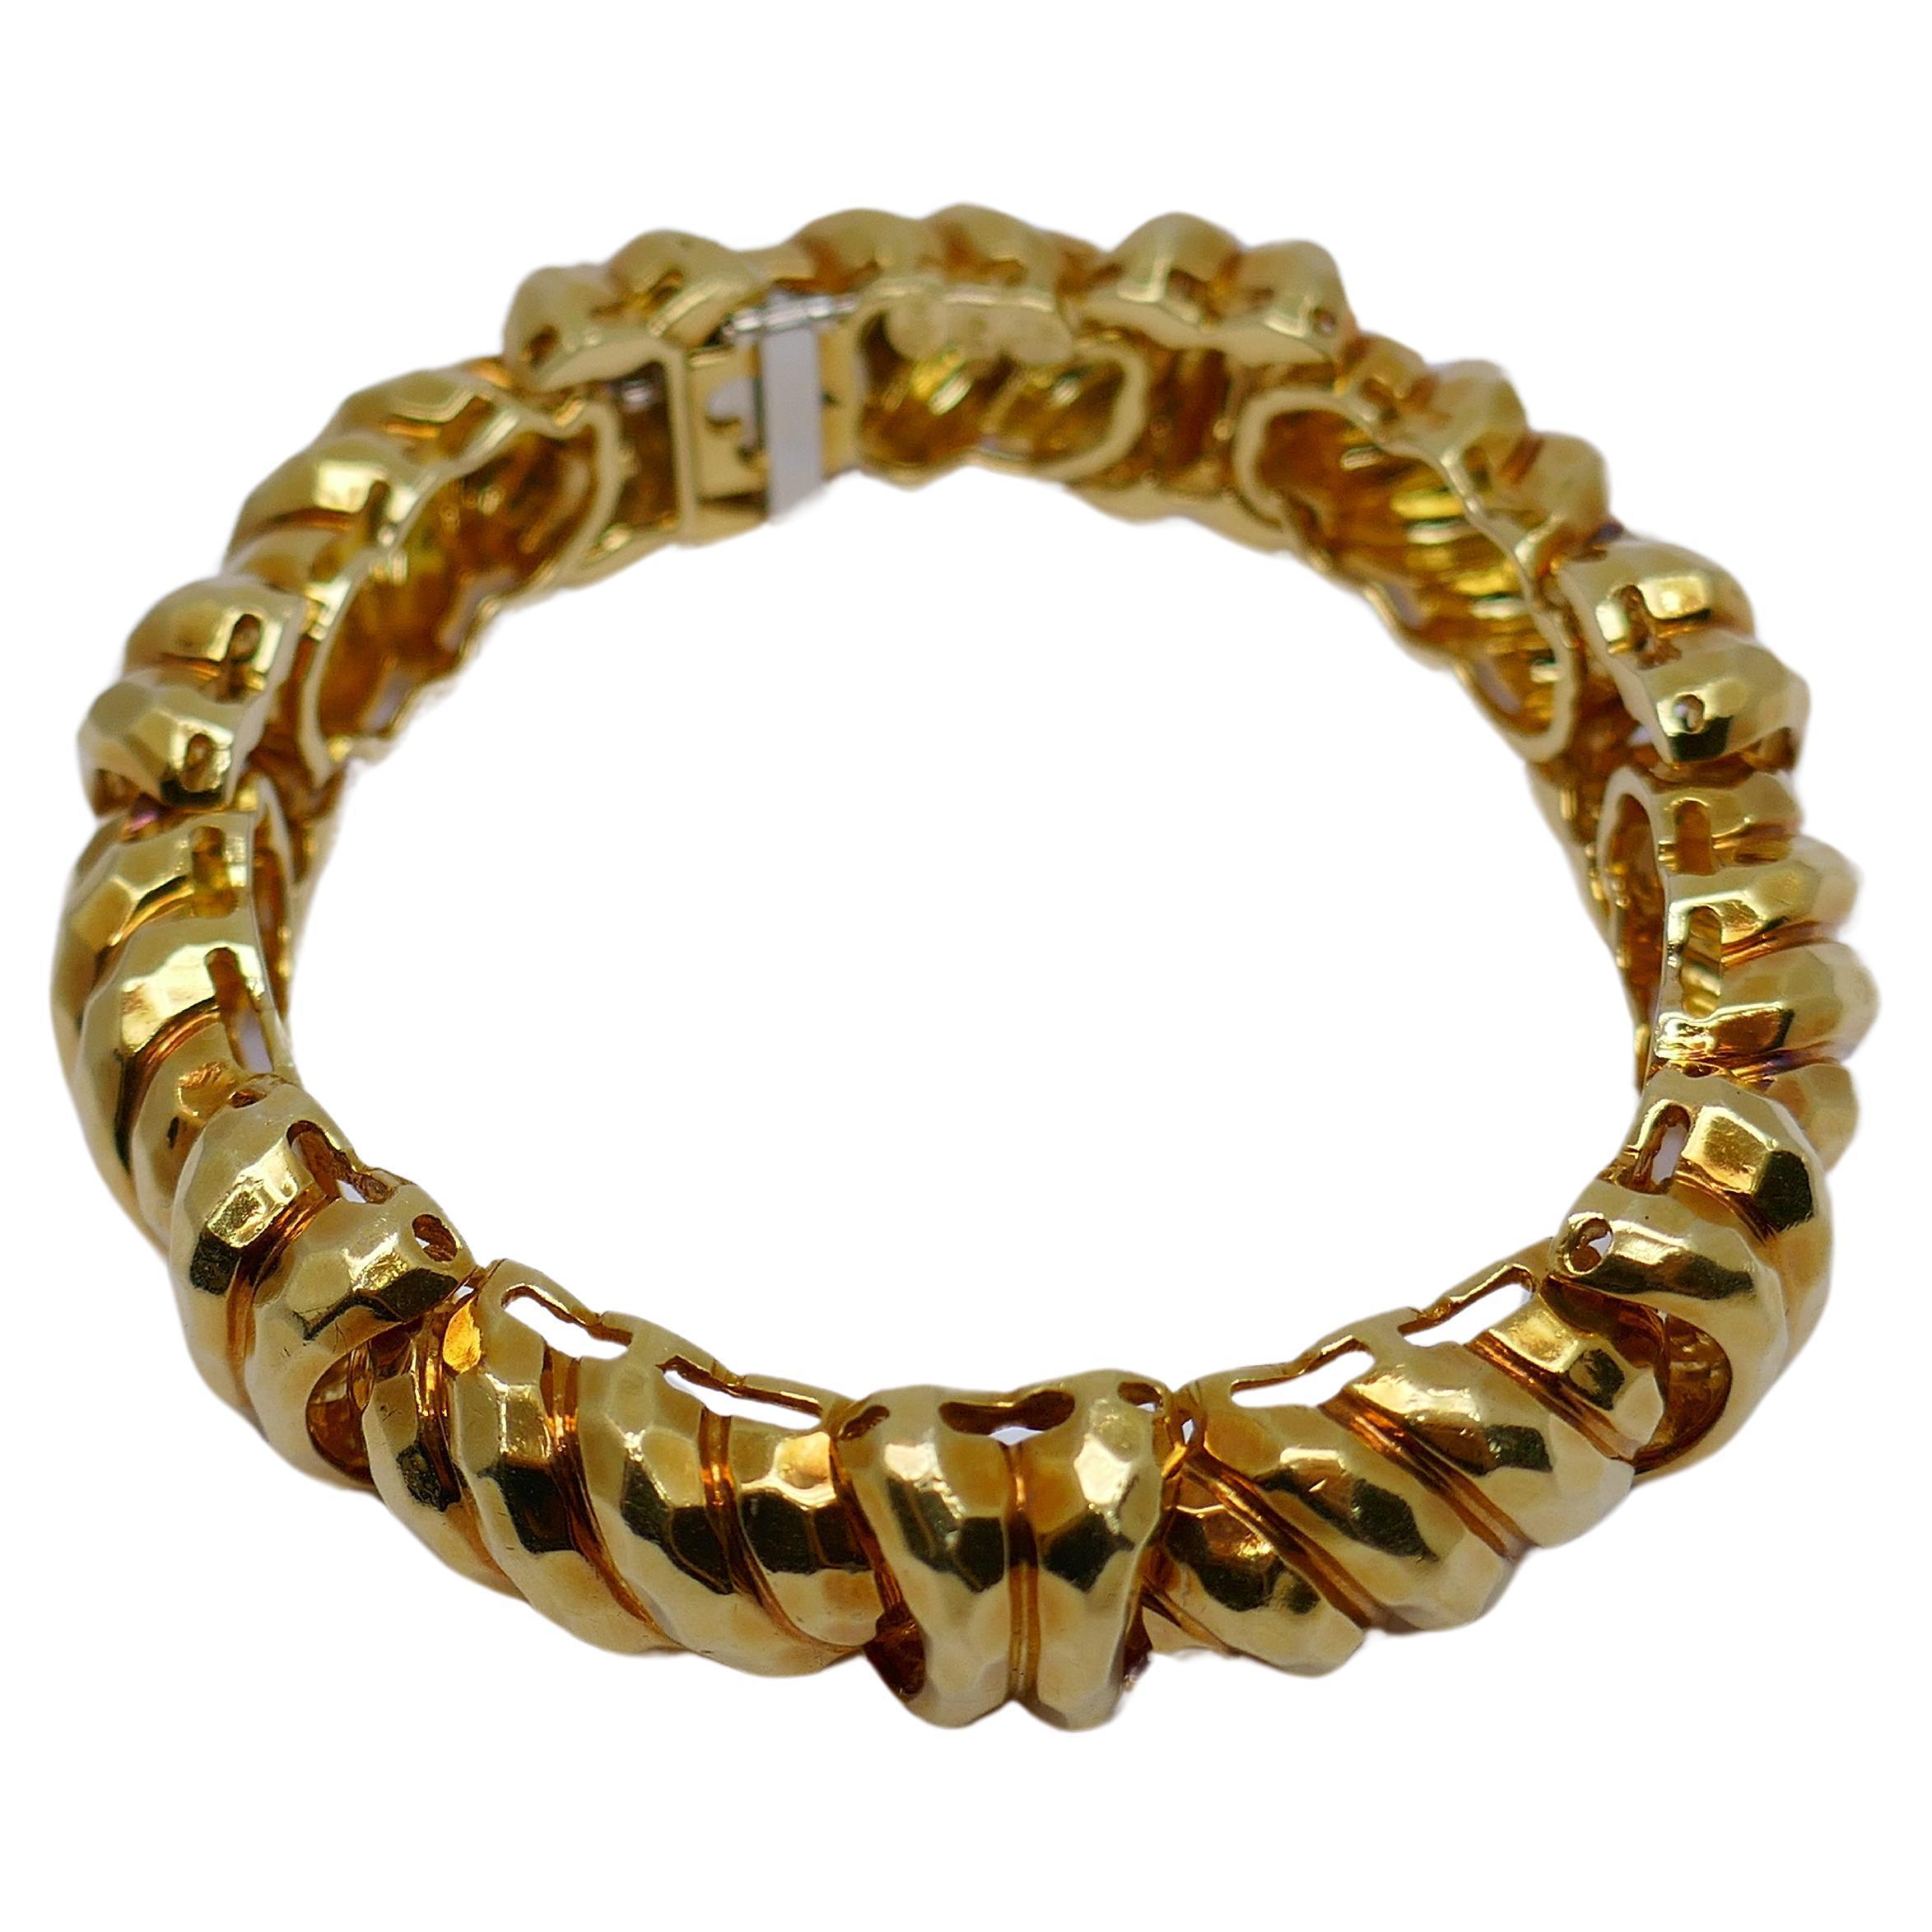 A gorgeous 18k gold bracelet by Henry Dunay. Made of the sparkly hammered gold, Dunay's signature style. The faceted surface  beautifully reflects the light. Due to this technique, Dunay's pieces are not only unique looking but also extremely